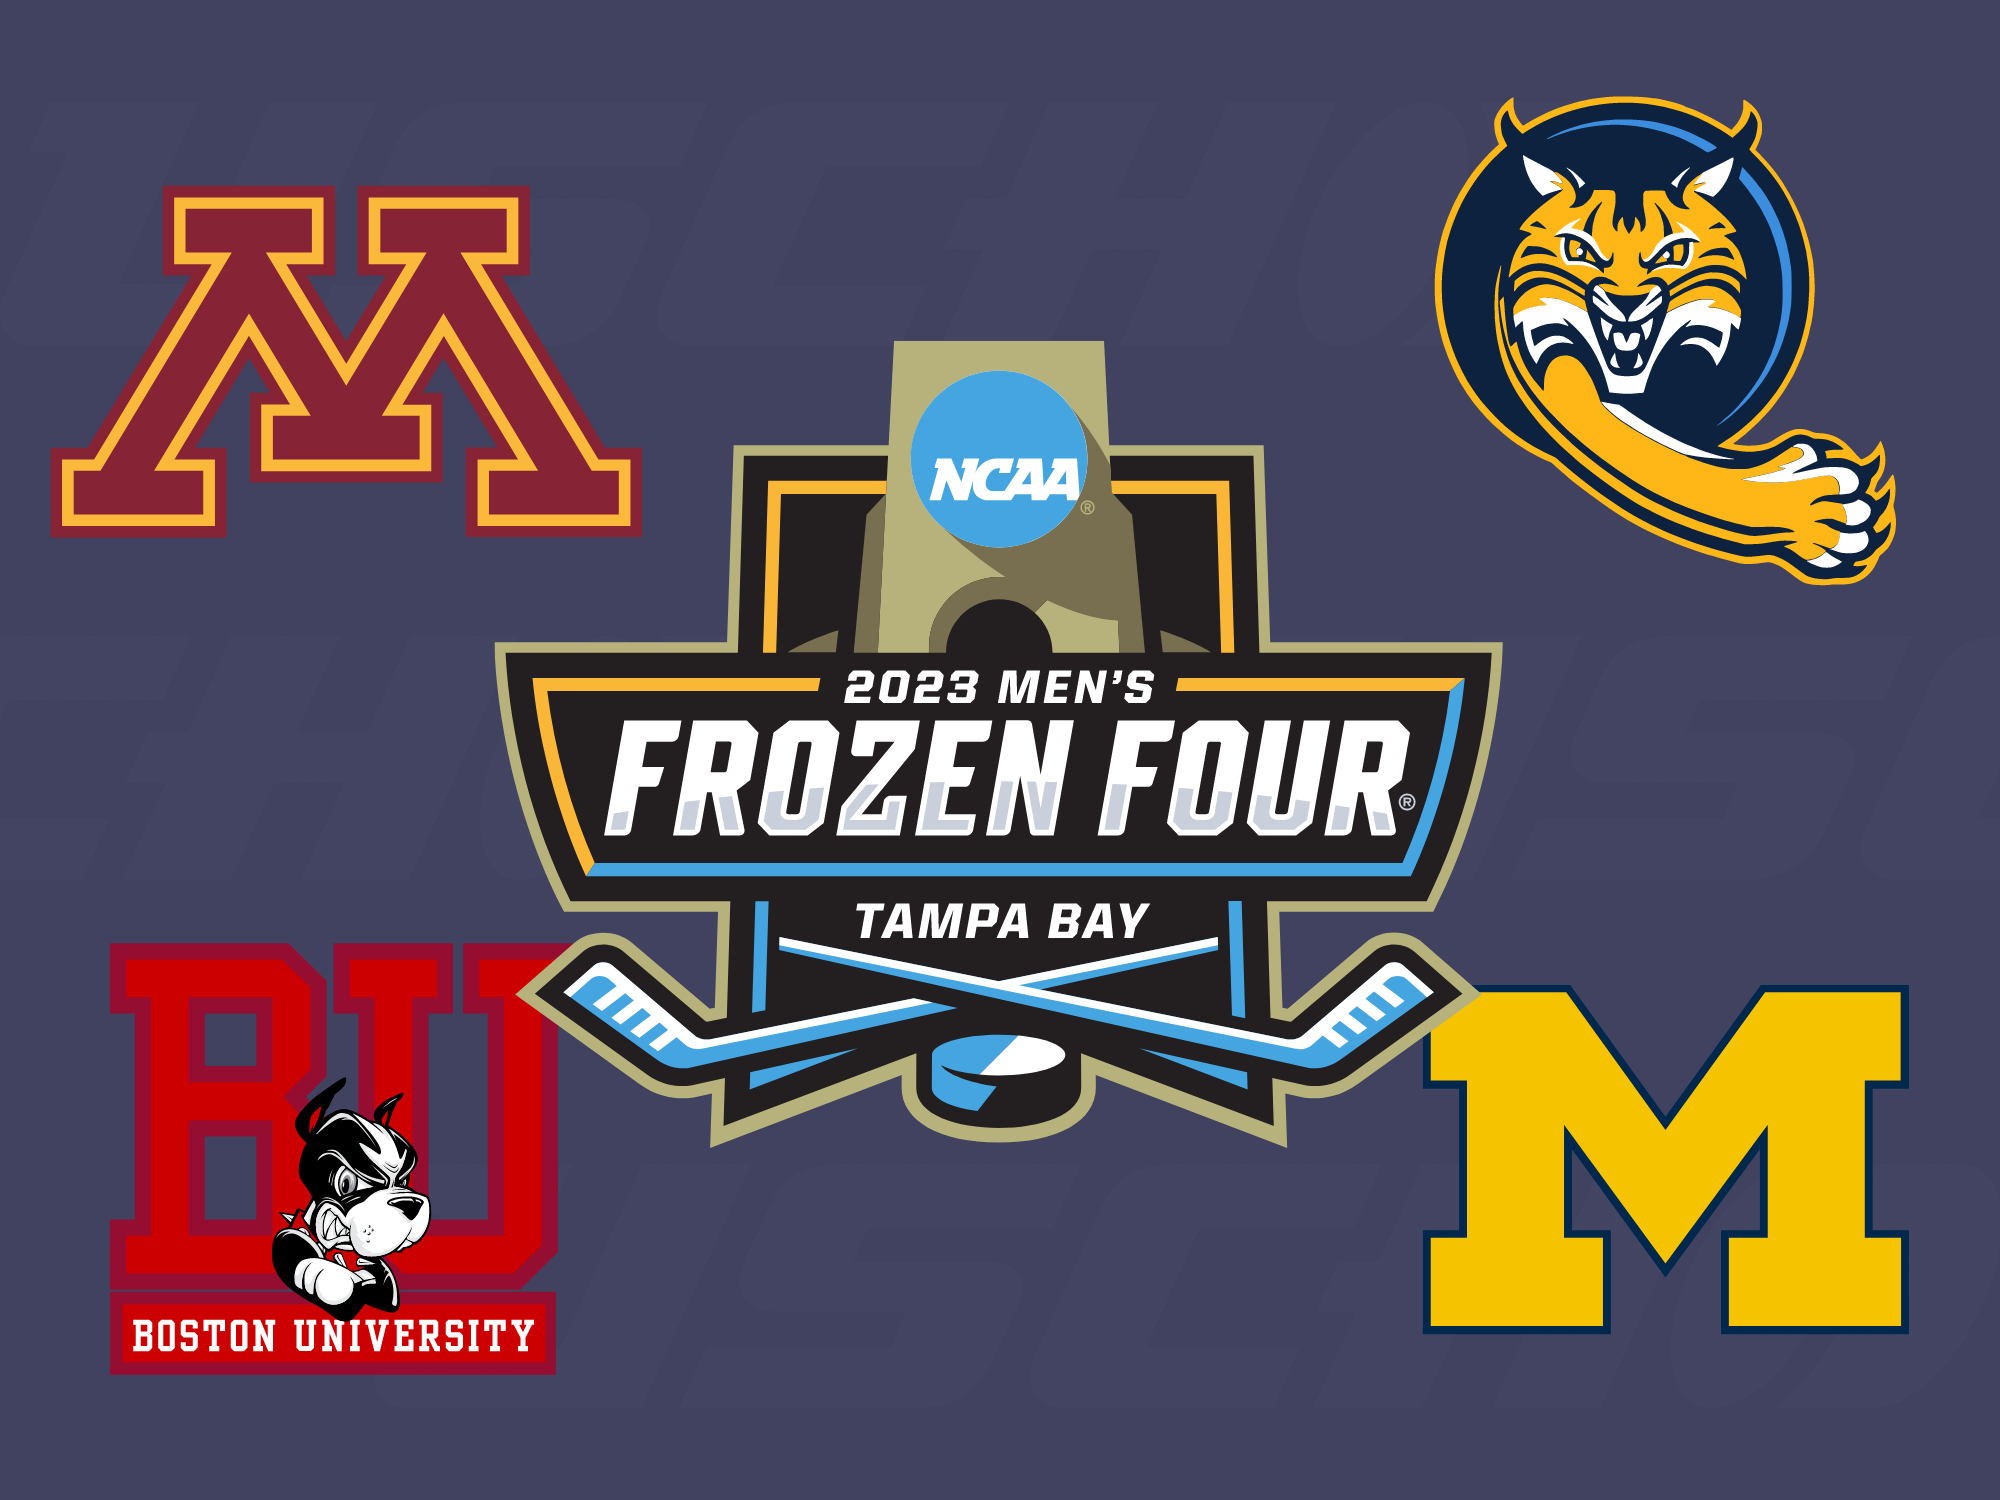 An early look at the 2023 NCAA Men's Frozen Four Boston University